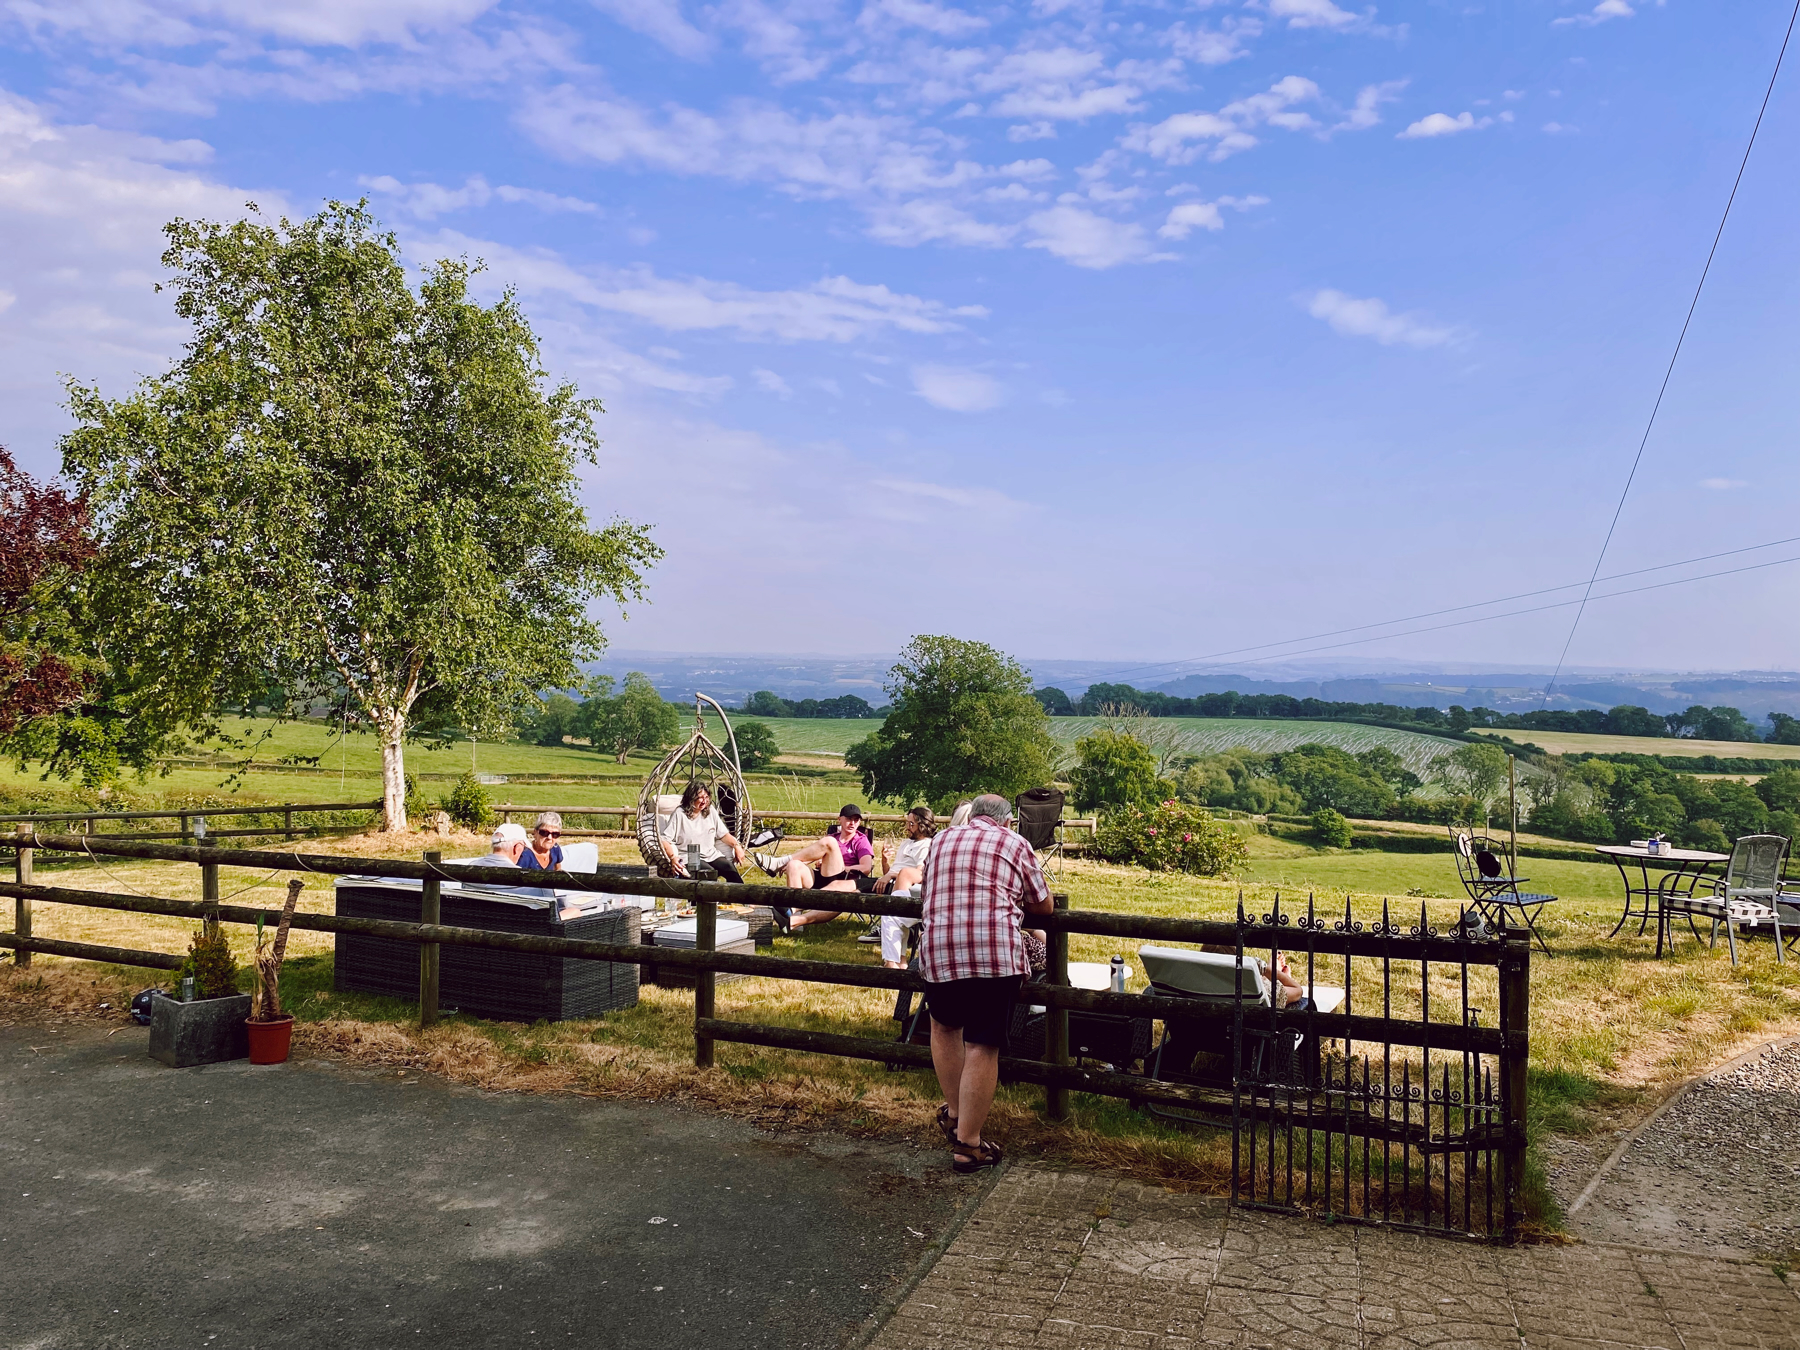 Group of people drinking in foreground, background of fields and blue skies